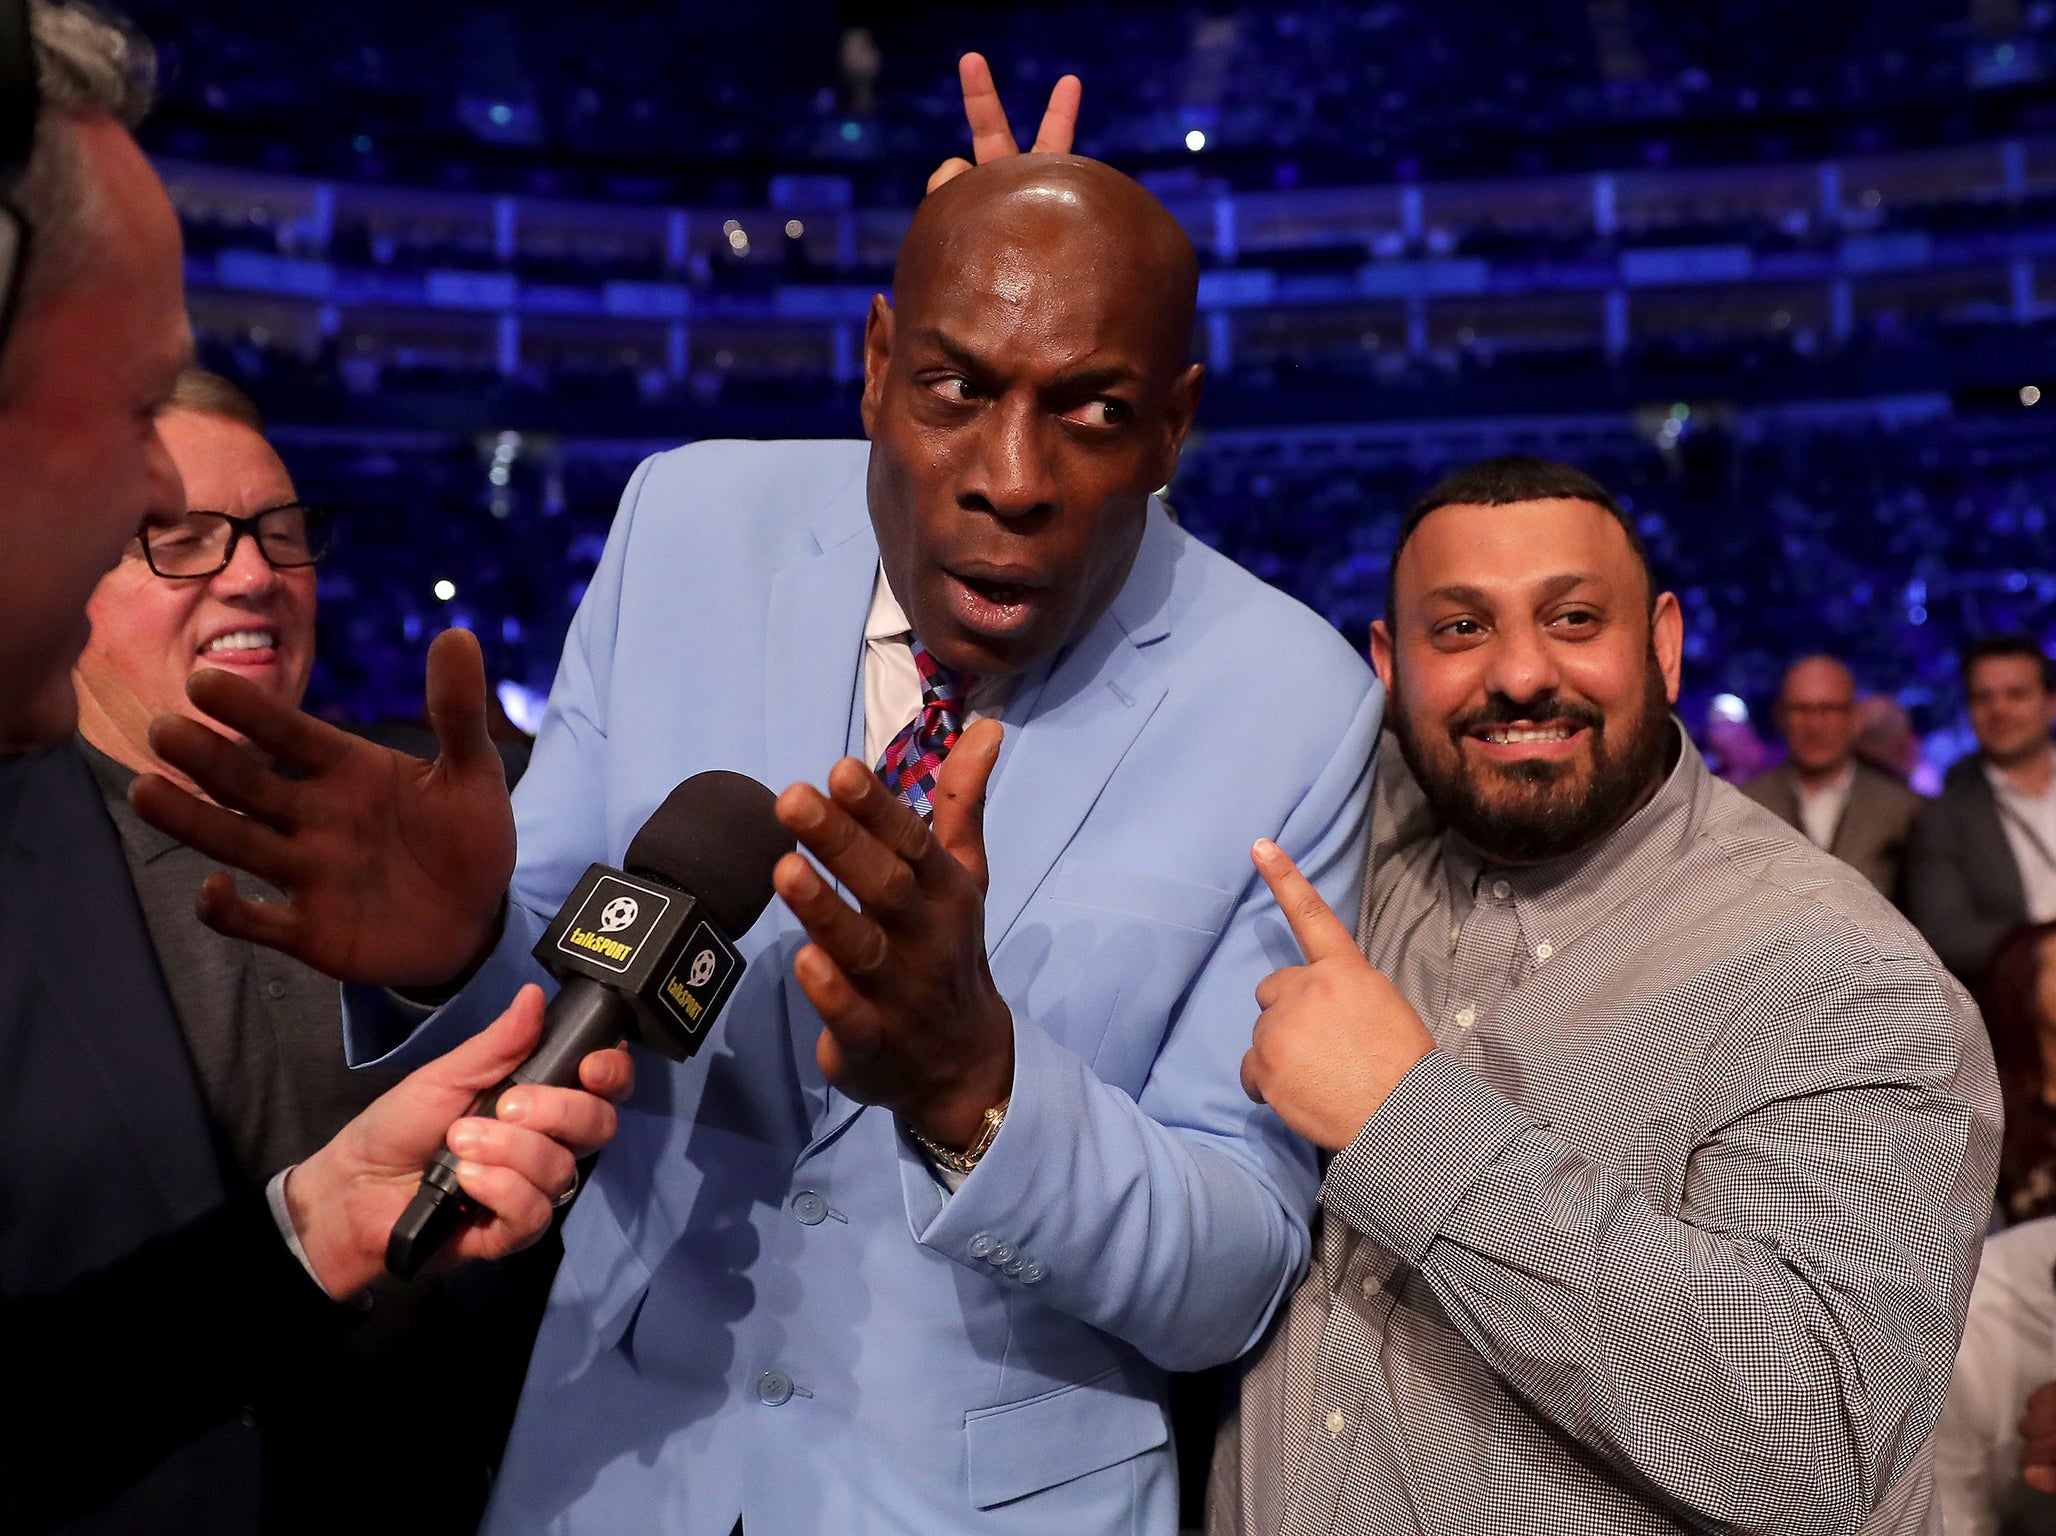 Frank Bruno was pictured looking fit and healthy at the DeGale vs Eubank fight